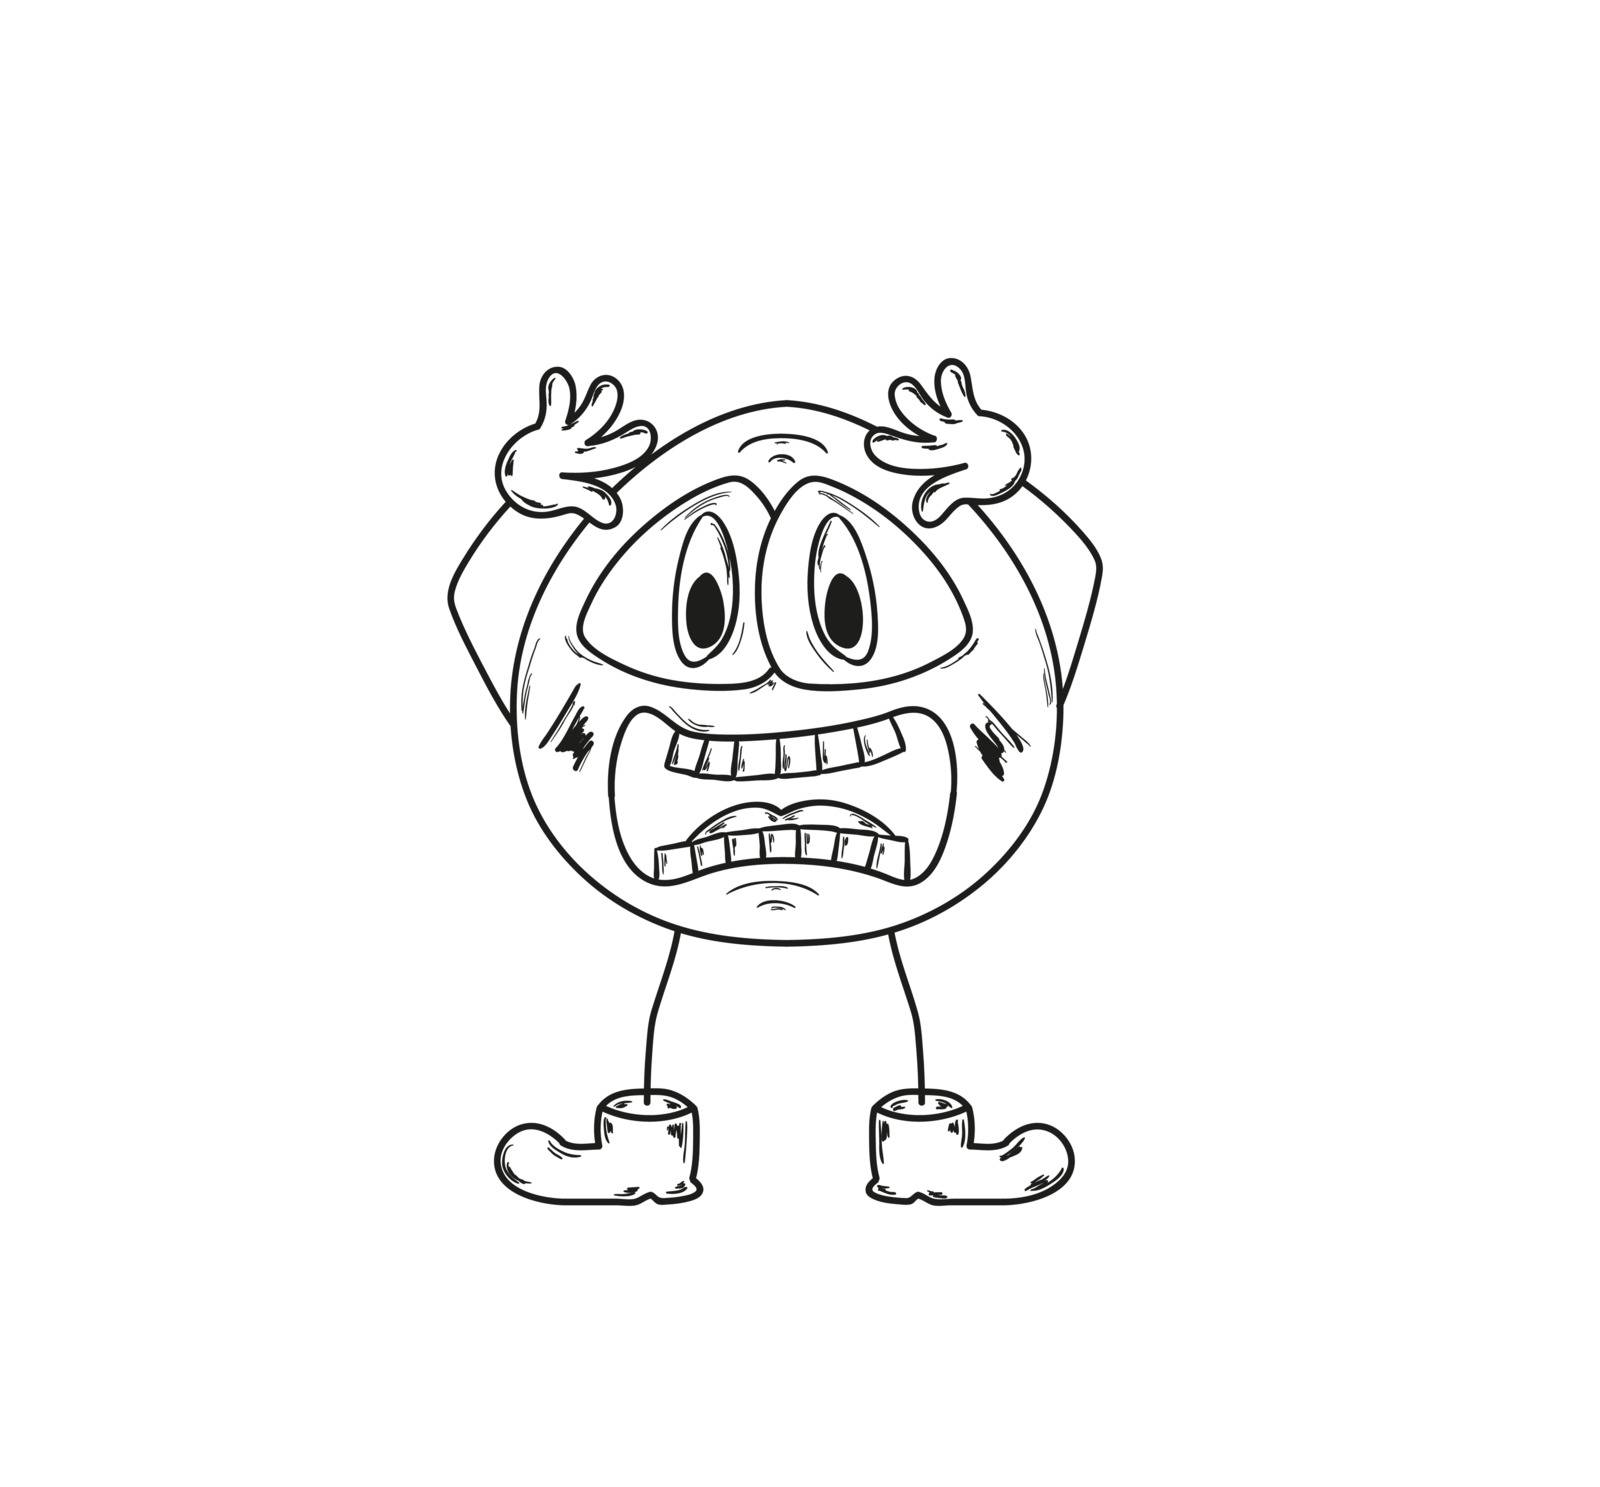 sketch of the shocked emoticon on white background